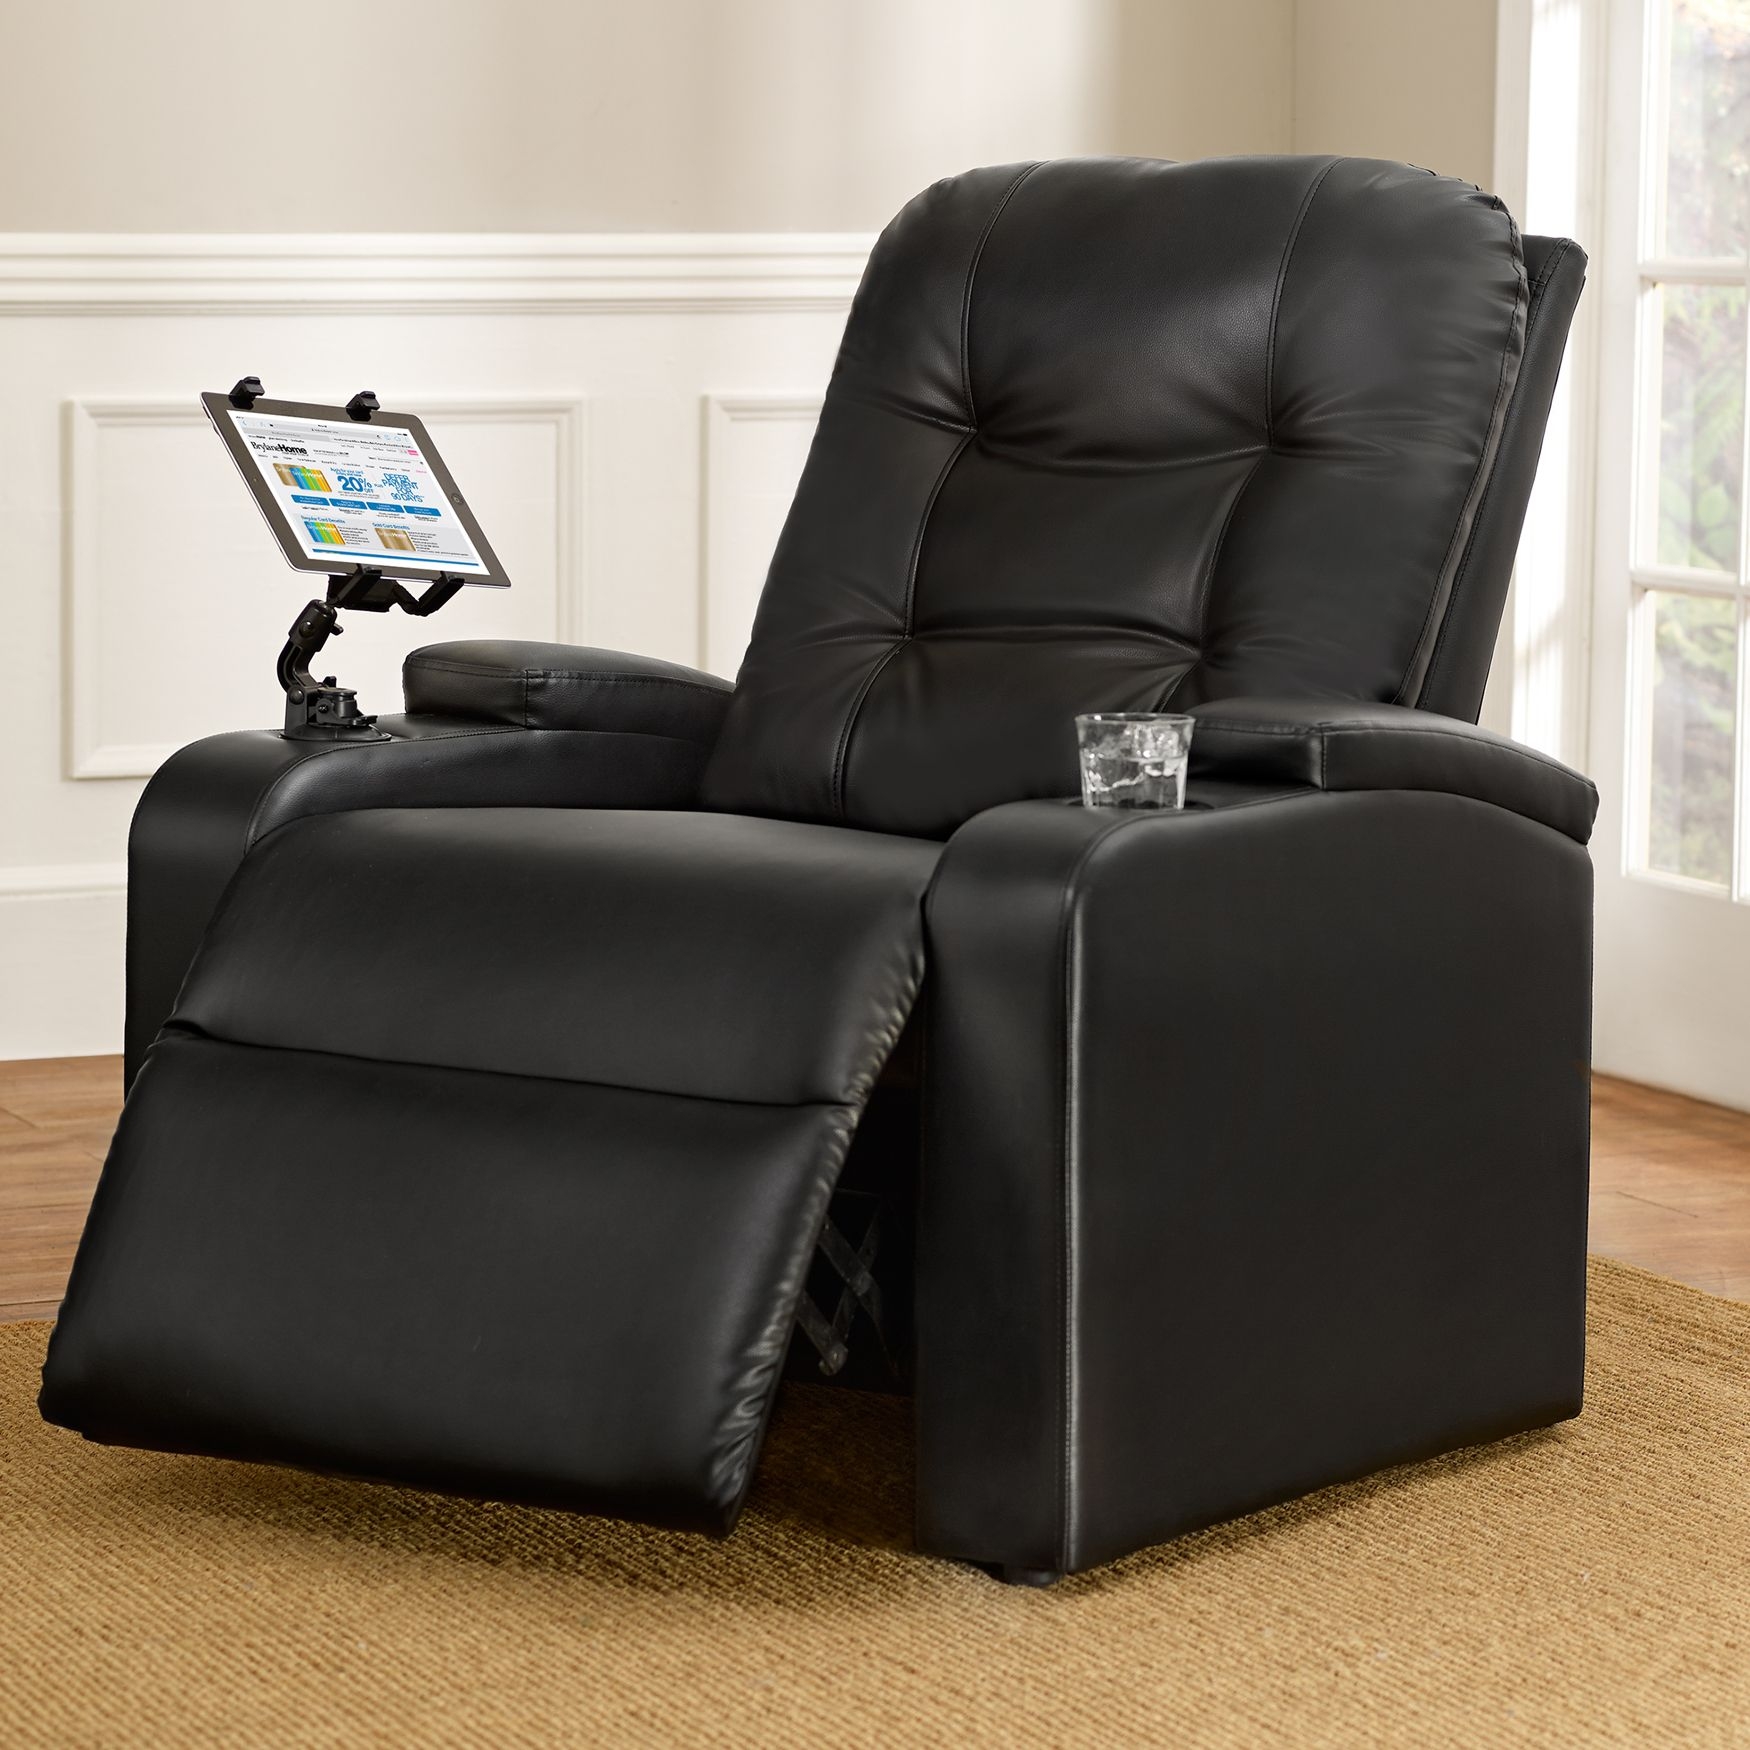 Plus+Size Living Brylanehome Extra Wide Tufted Recliner With Cup Holder And Removable Tablet Holder